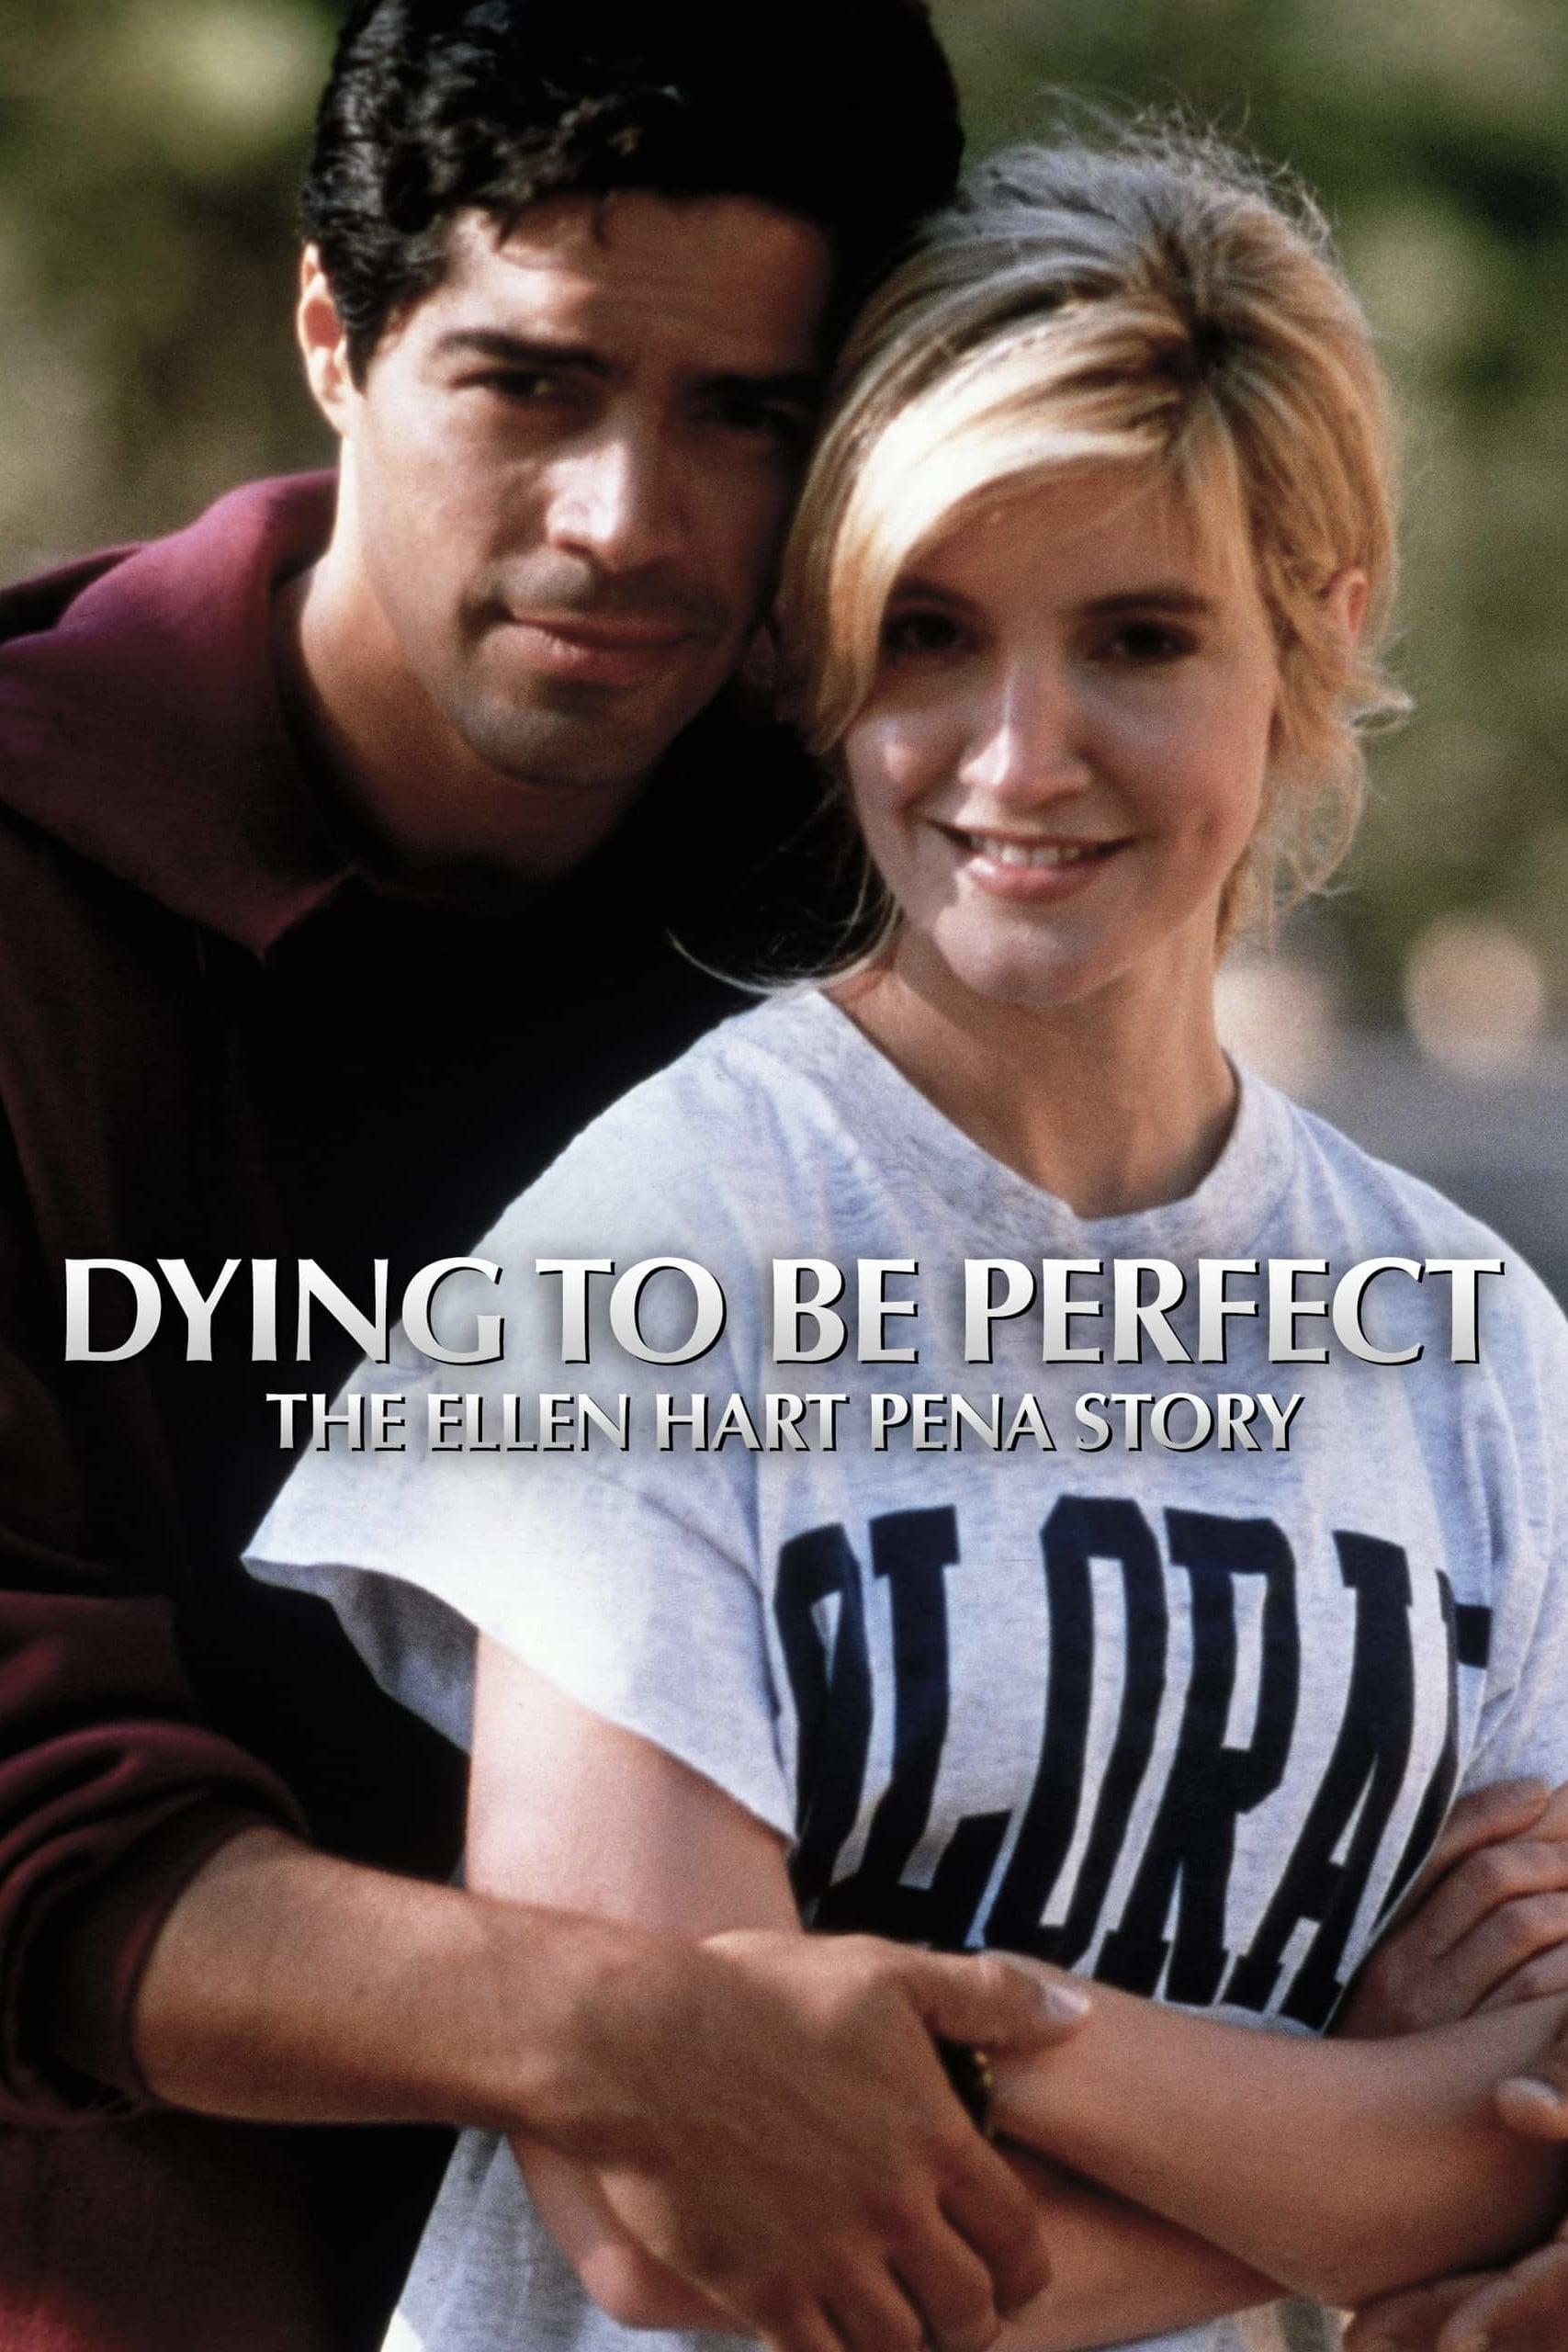 Dying to Be Perfect: The Ellen Hart Pena Story poster